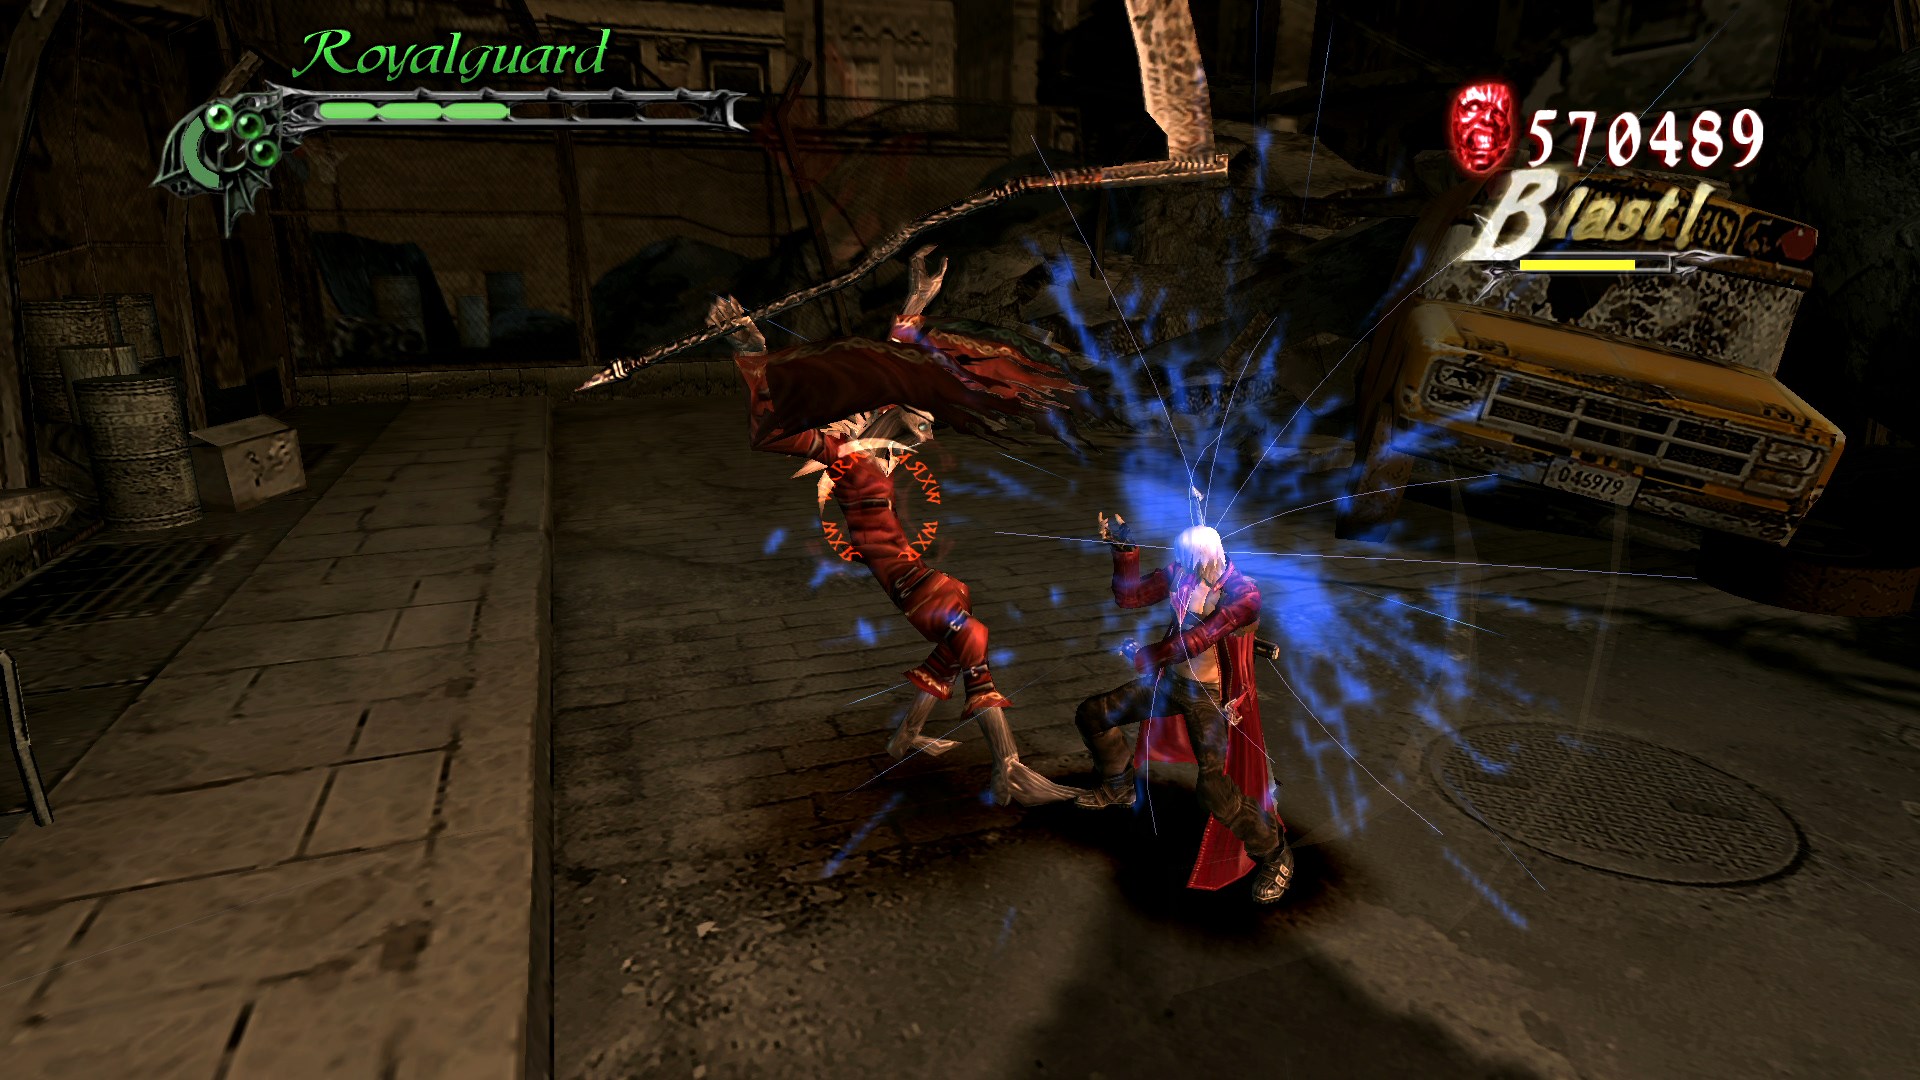 Devil may cry 3 can find steam фото 67